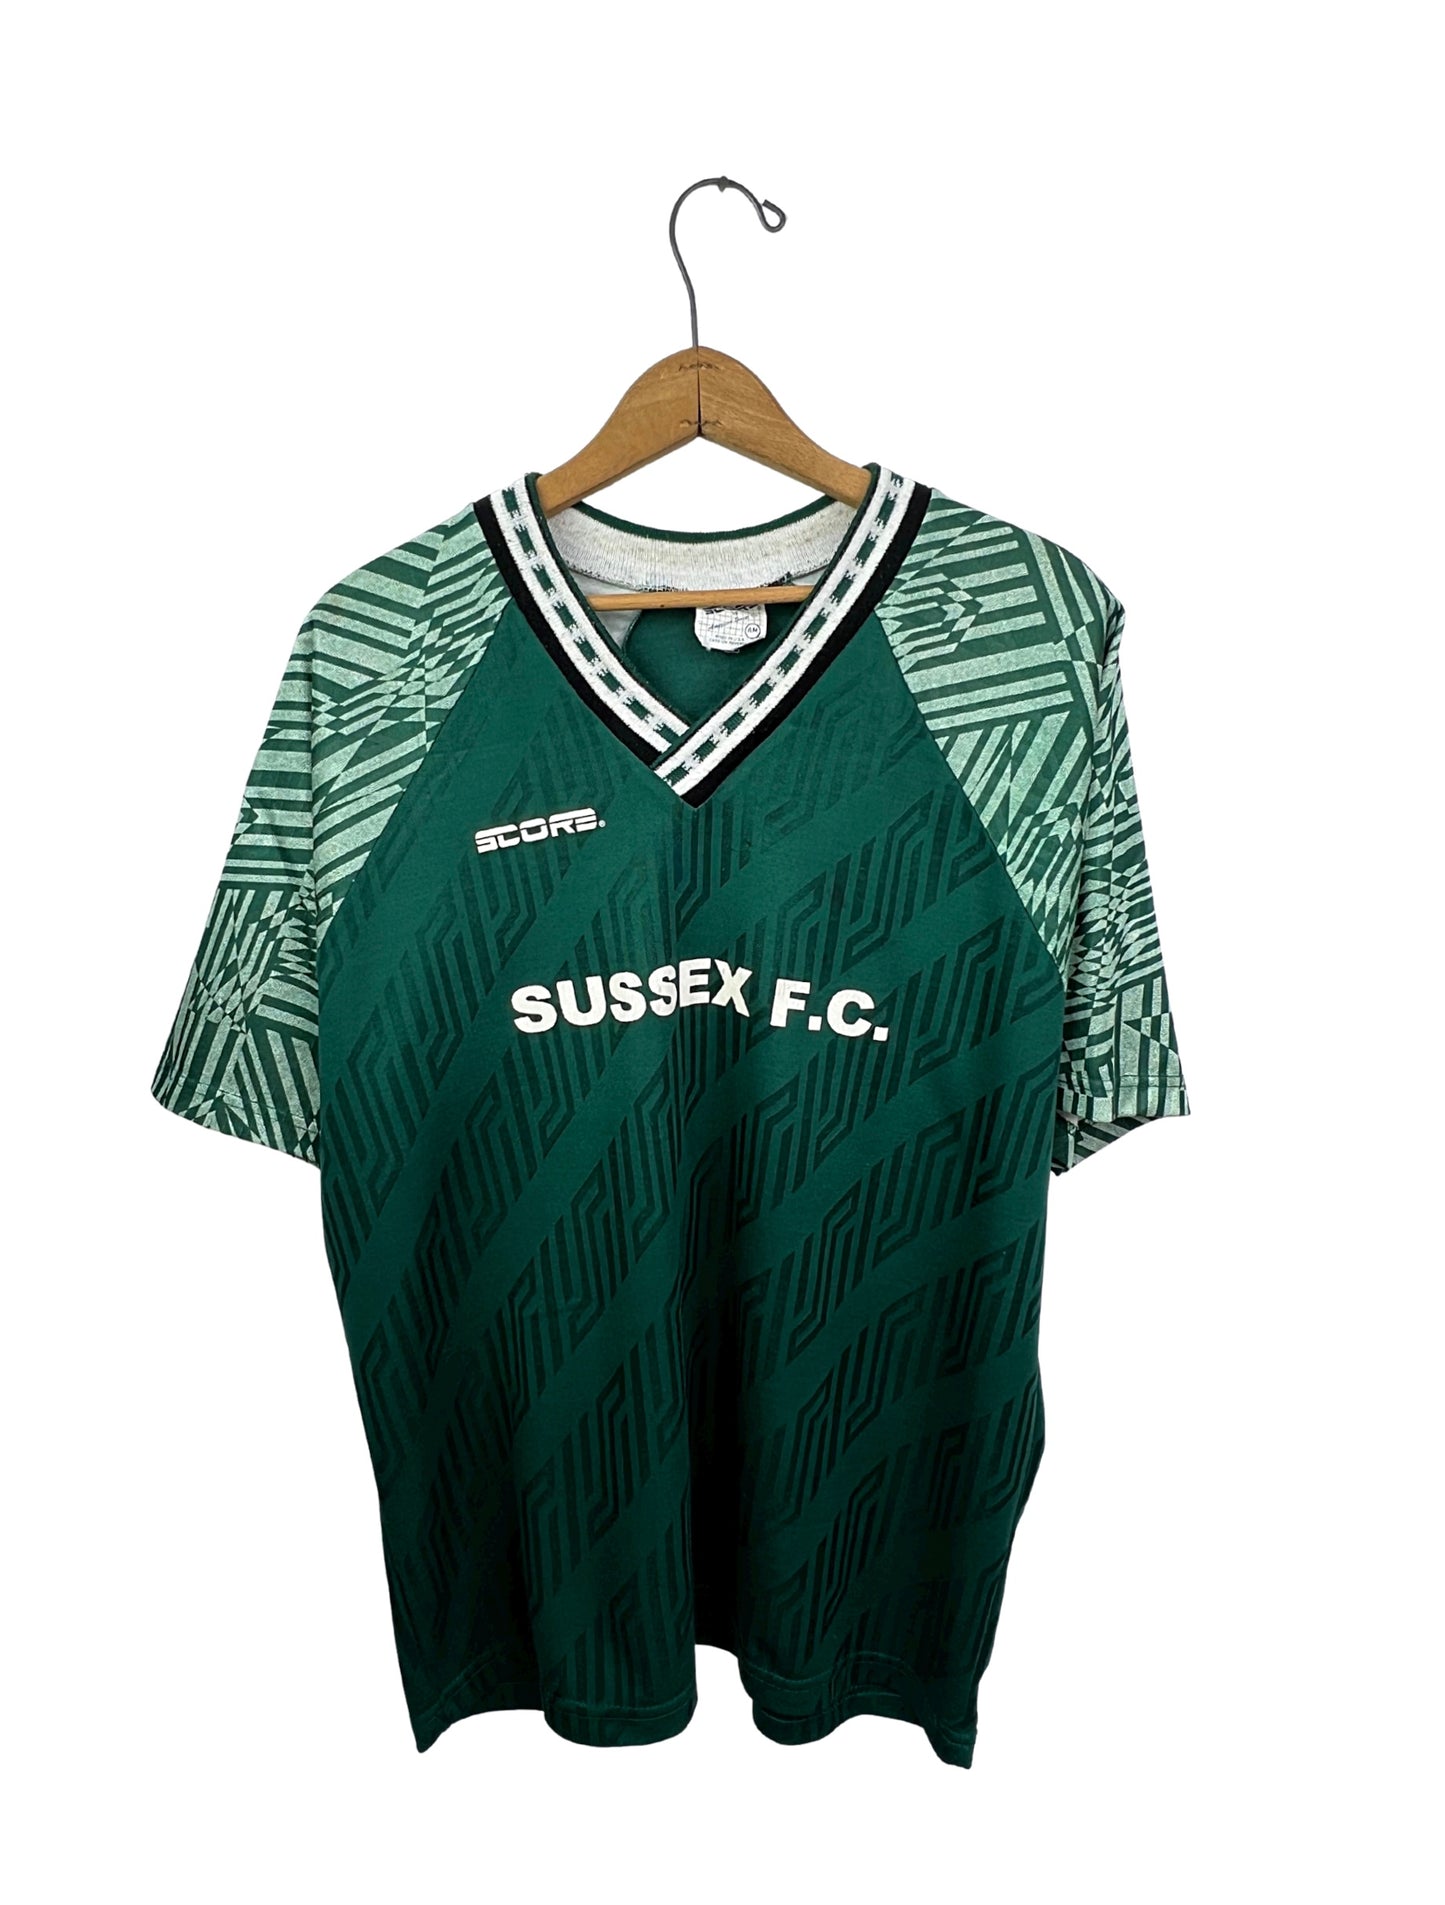 90's SUSSEX FC Southern Combination Football League Soccer Score #19 Jersey Size Medium